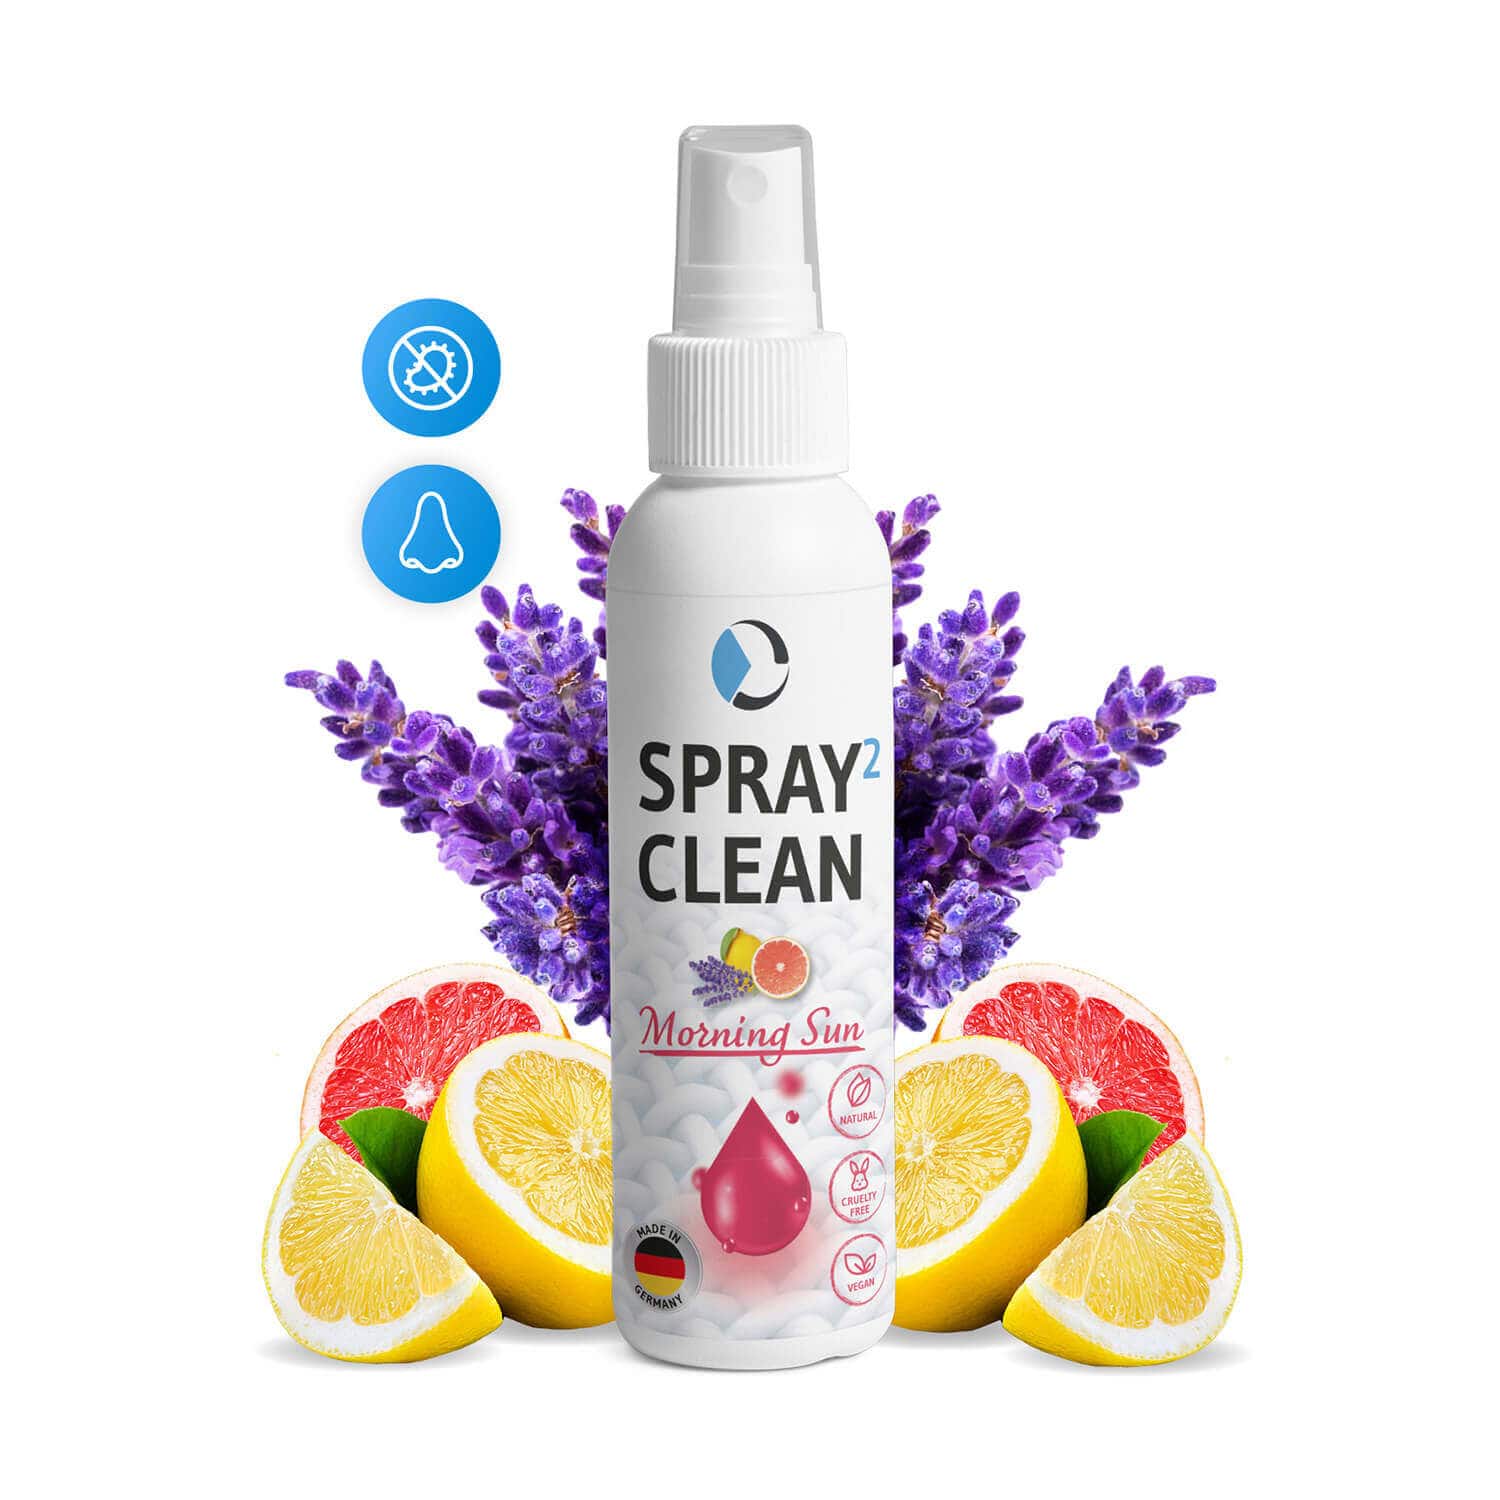 SPRAY² Clean Morning Sun Cleaning-Kissenspray - Third of Life